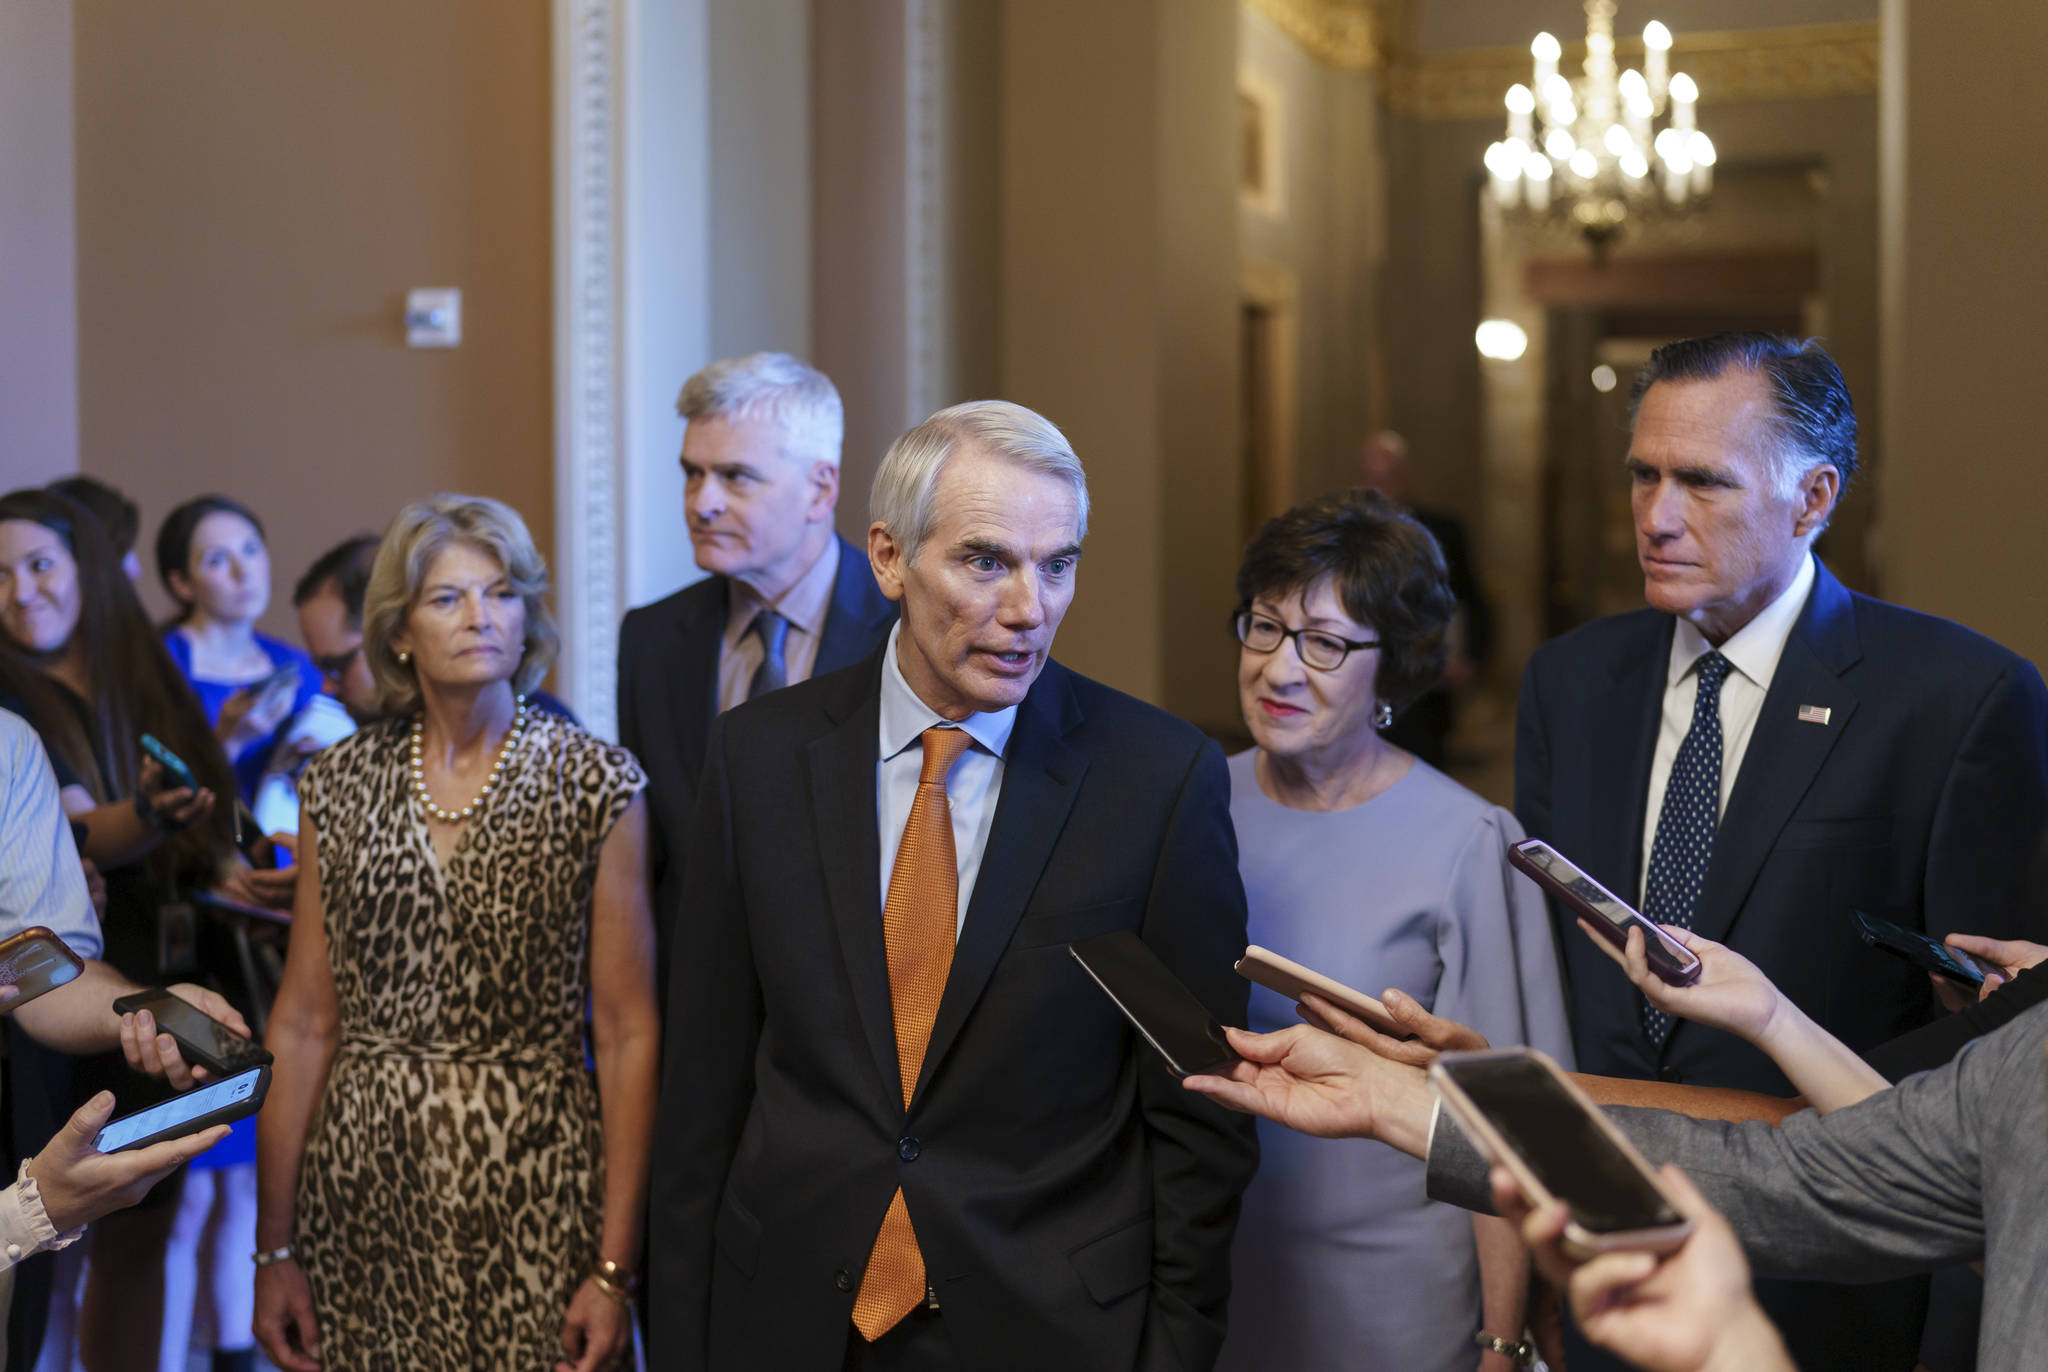 Sen. Rob Portman, R-Ohio, center, joined by, from left, Sen. Lisa Murkowski, R-Alaska, Sen. Bill Cassidy, R-La., Sen. Susan Collins, R-Maine, and Sen. Mitt Romney, R-Utah, announces to reporters that he and the other GOP negotiators have reached agreement on a $1 trillion infrastructure bill with Democrats and are ready to vote to take up the bill, at the Capitol in Washington, Wednesday, July 28, 2021. (AP Photo/J. Scott Applewhite)